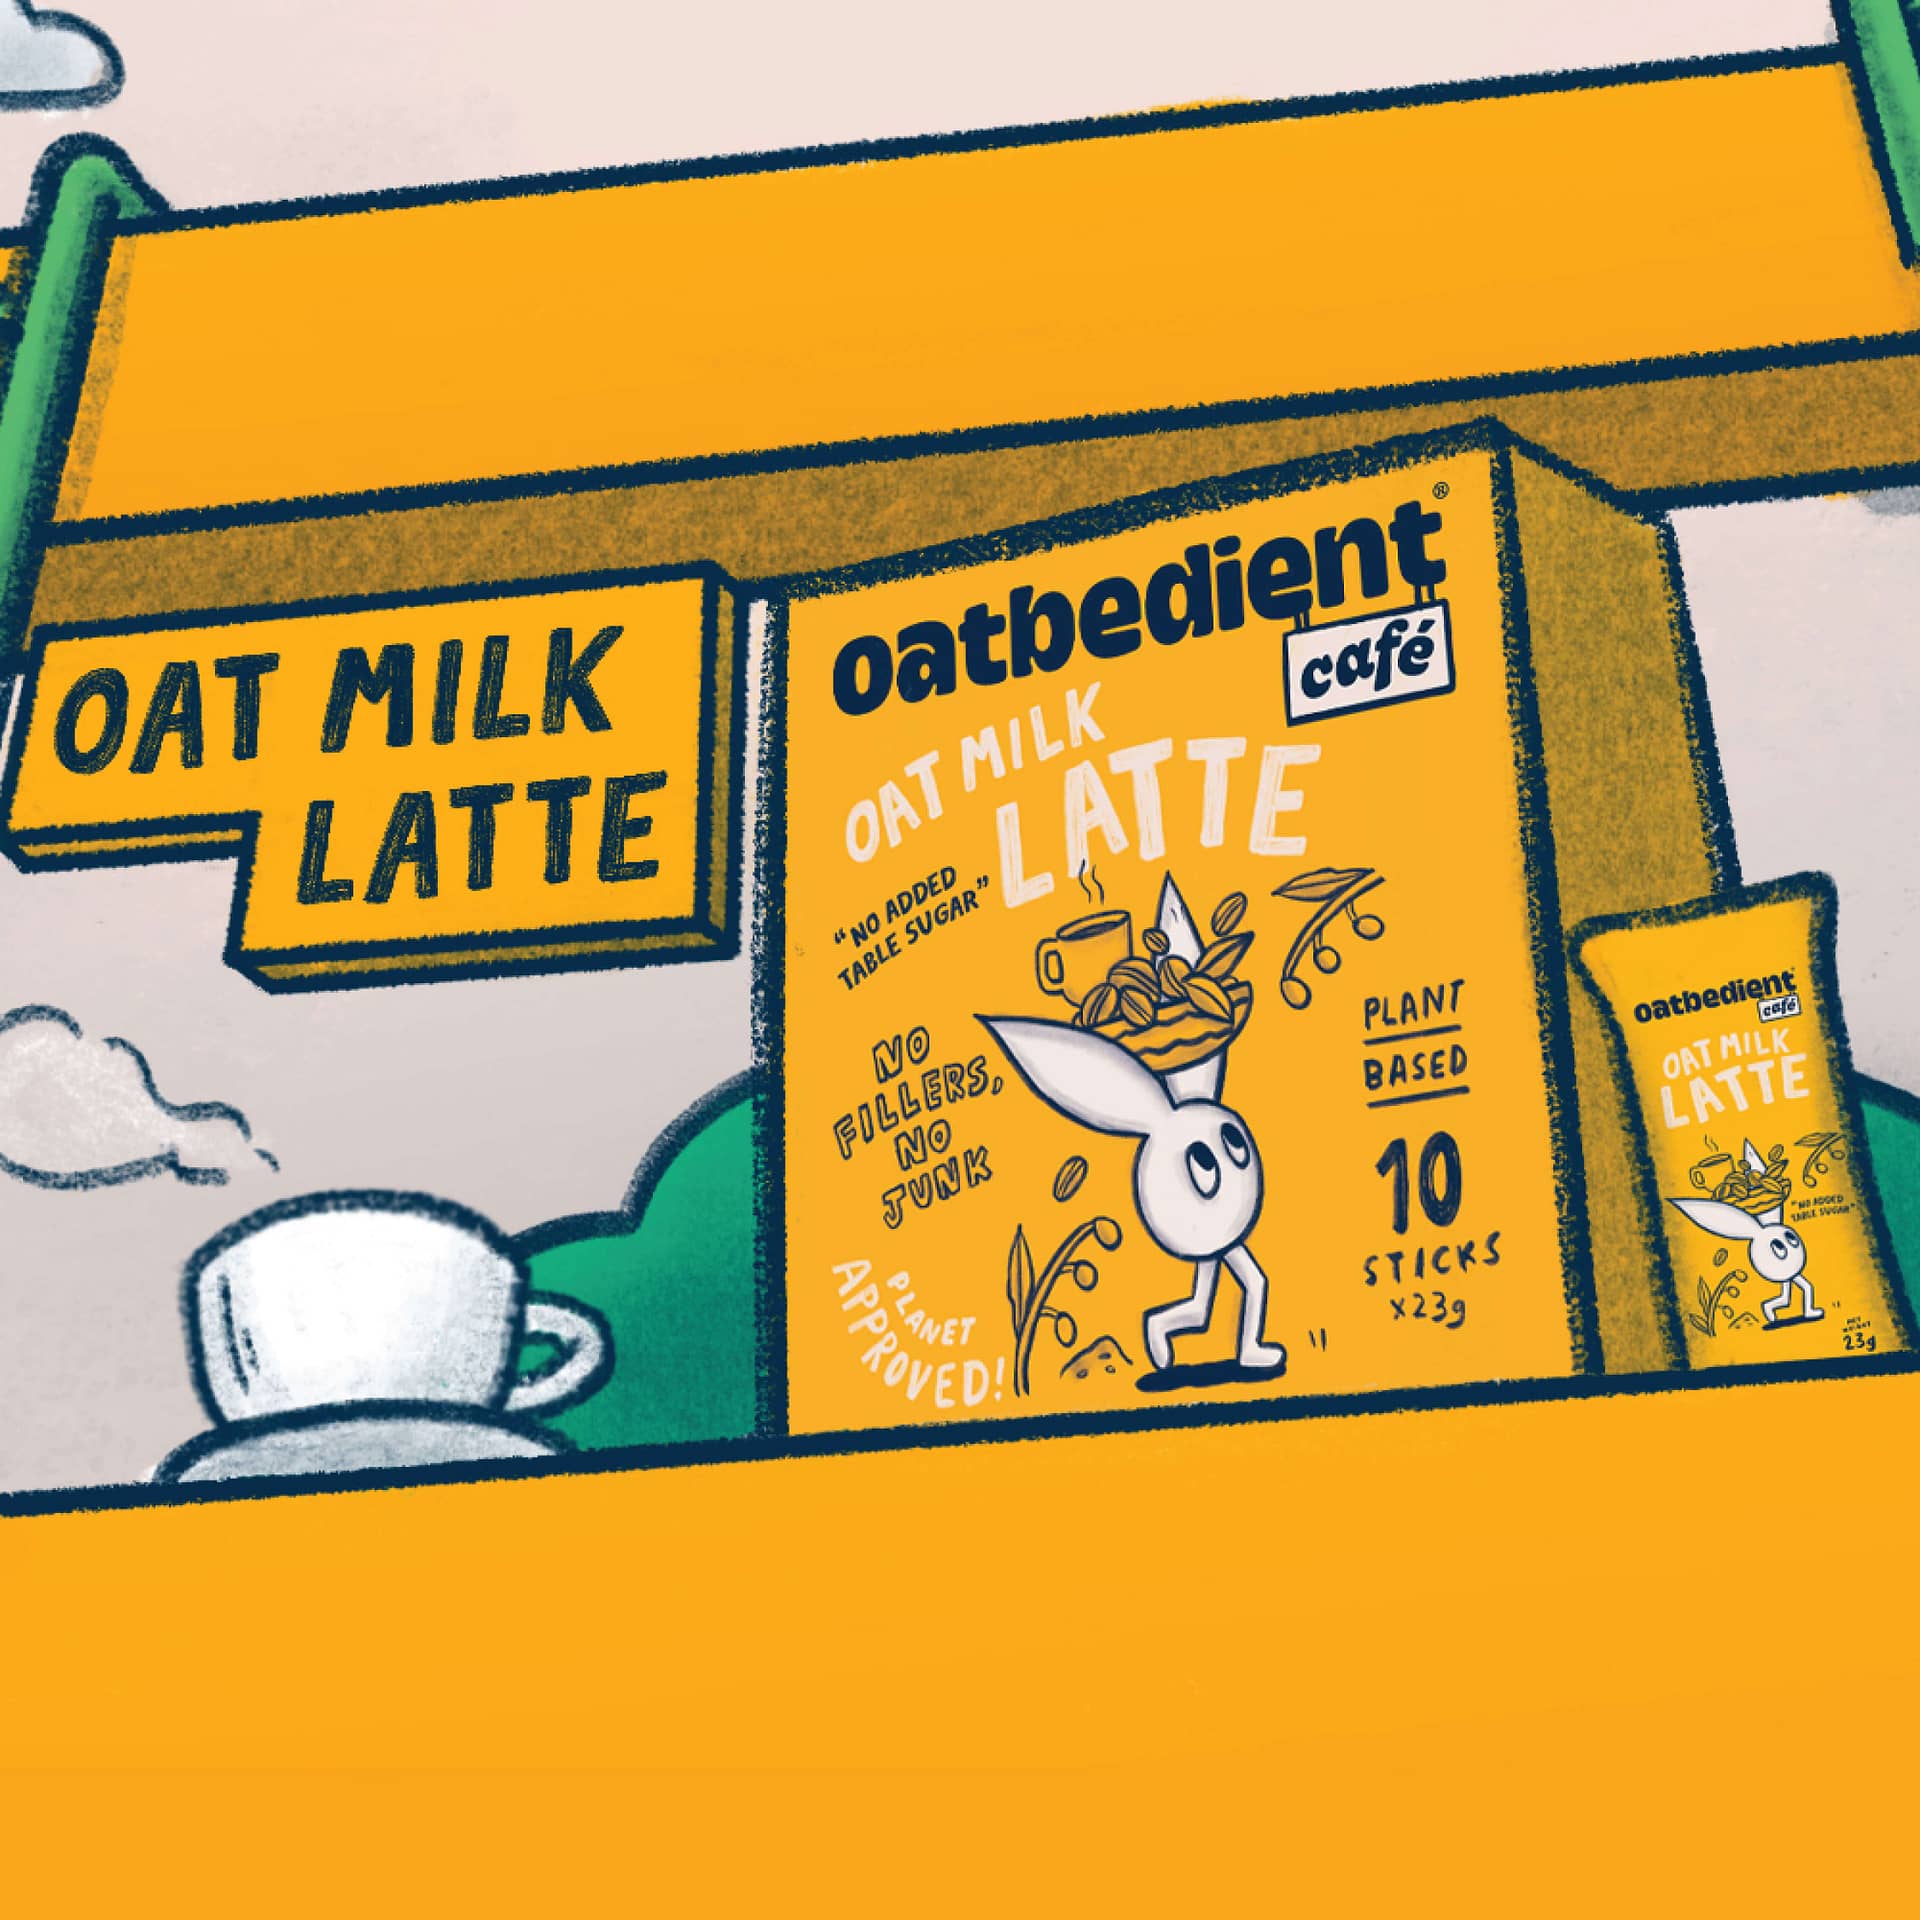 oatbedient cafe series